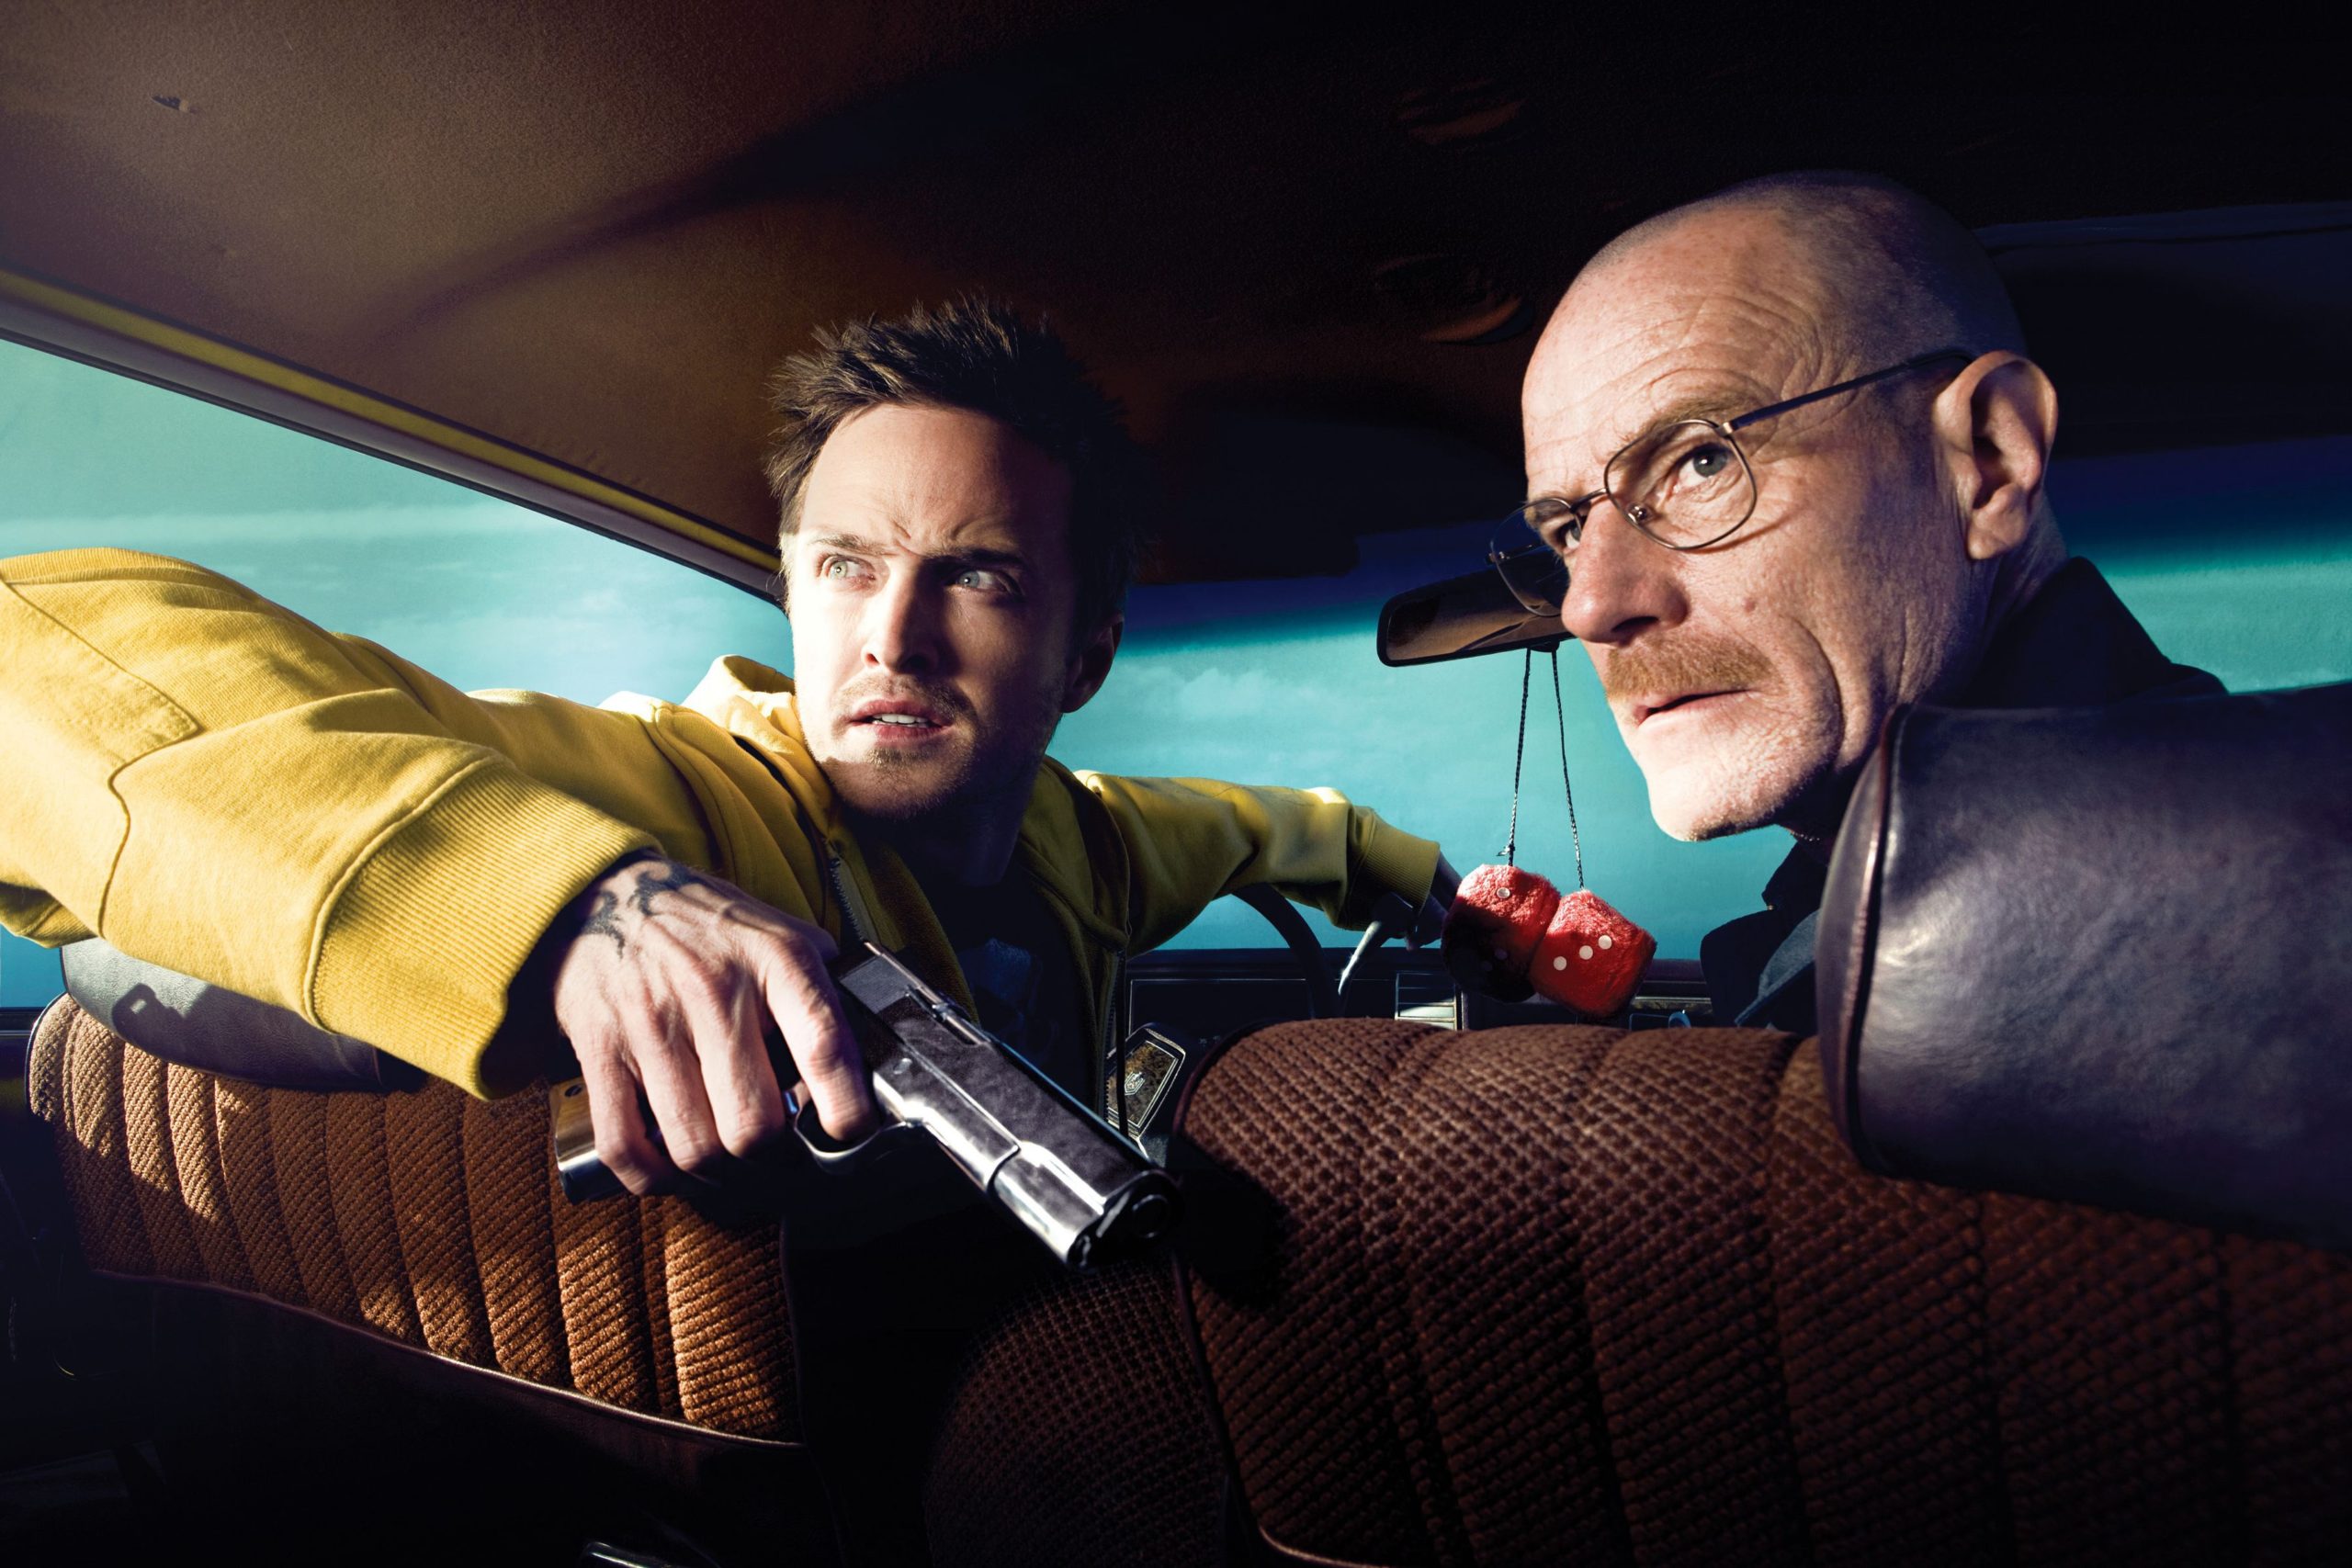 Jesse Pinkman is holding a gun and sitting with Walter White in the car